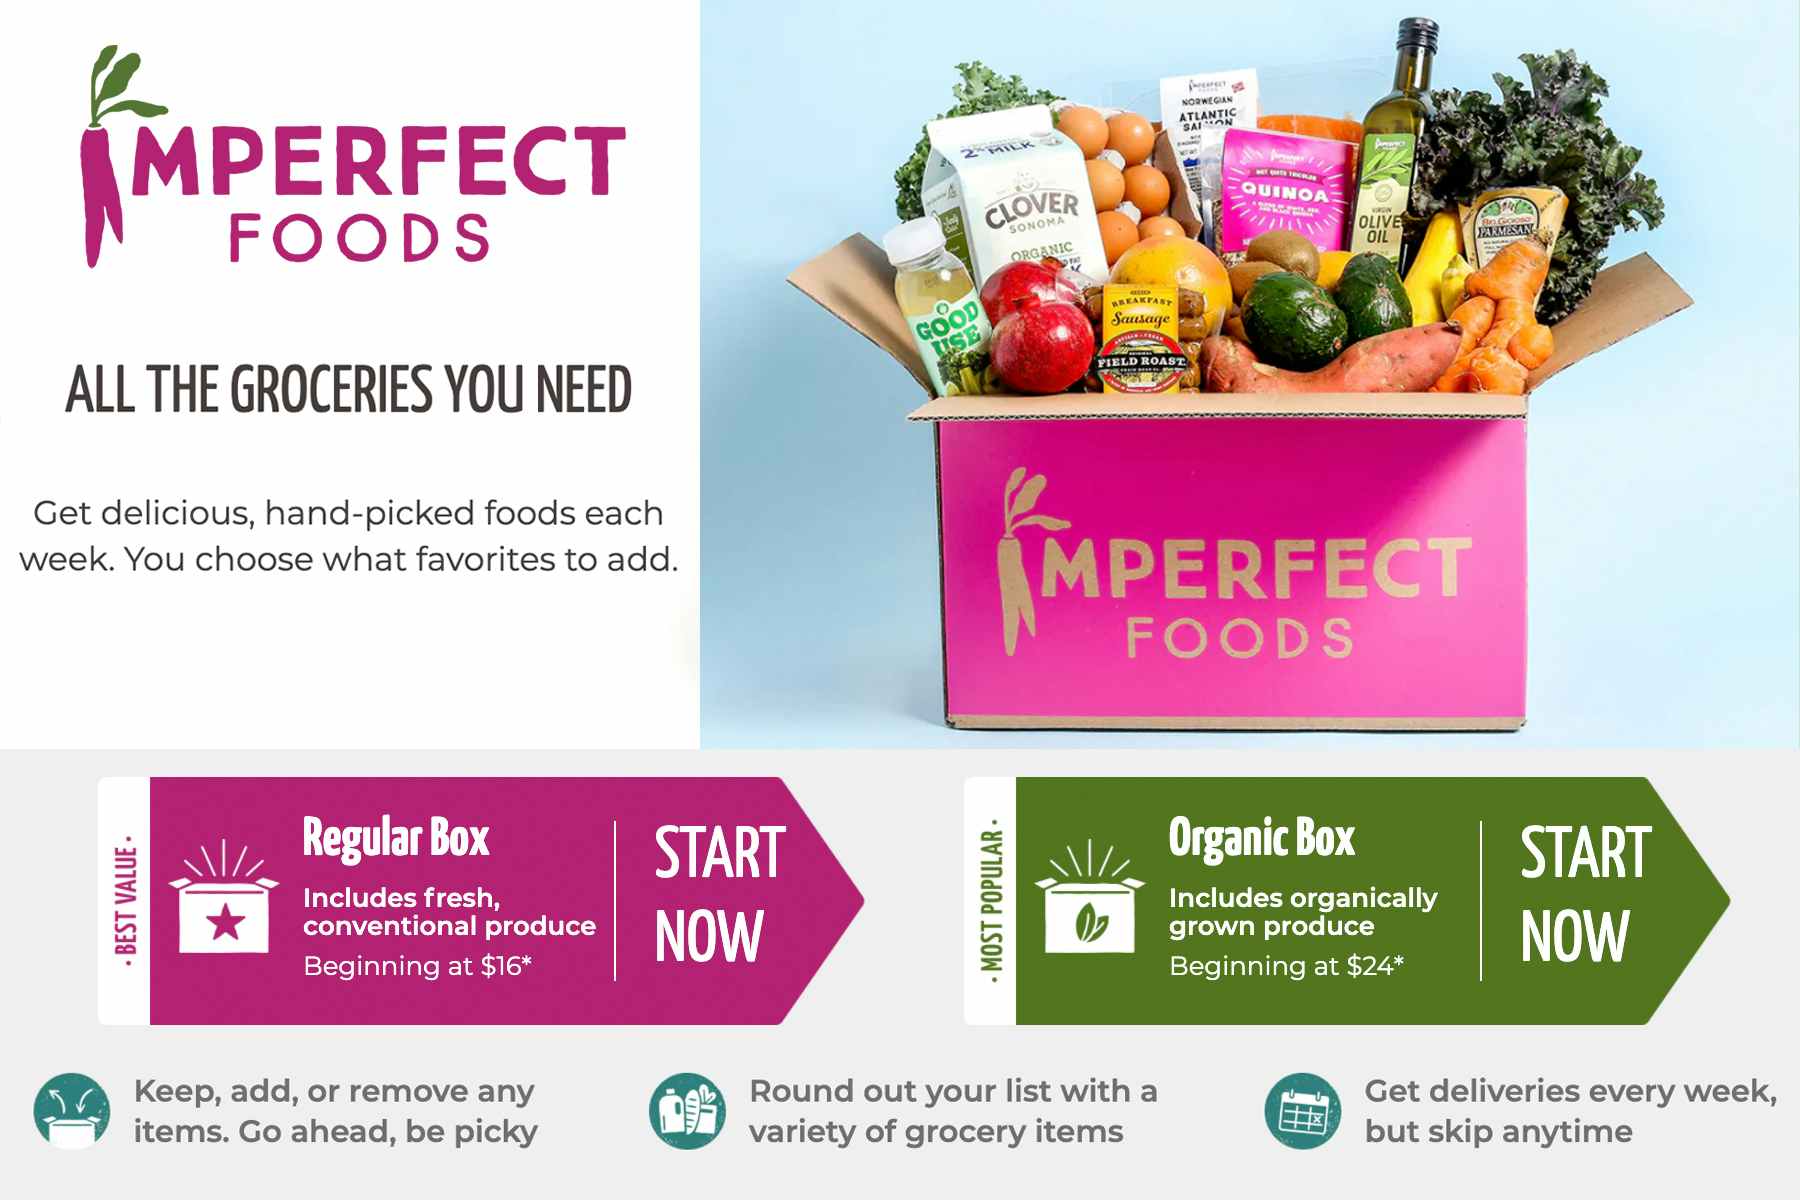 Imperfect Foods website homepage.